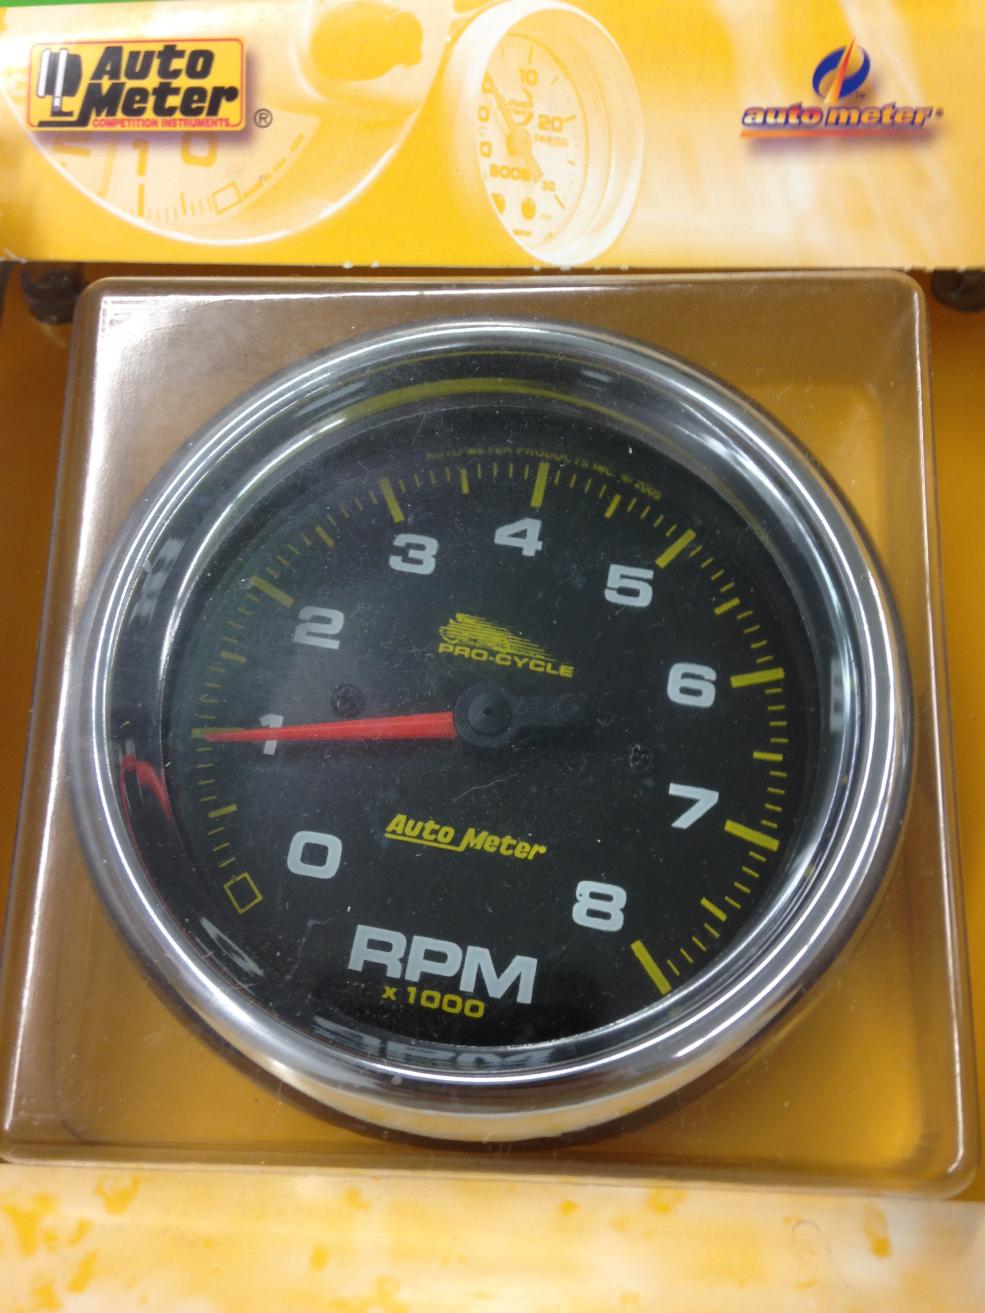 AutoMeter/Pro Cycle Gauges - Harley Davidson Forums auto meter wiring 